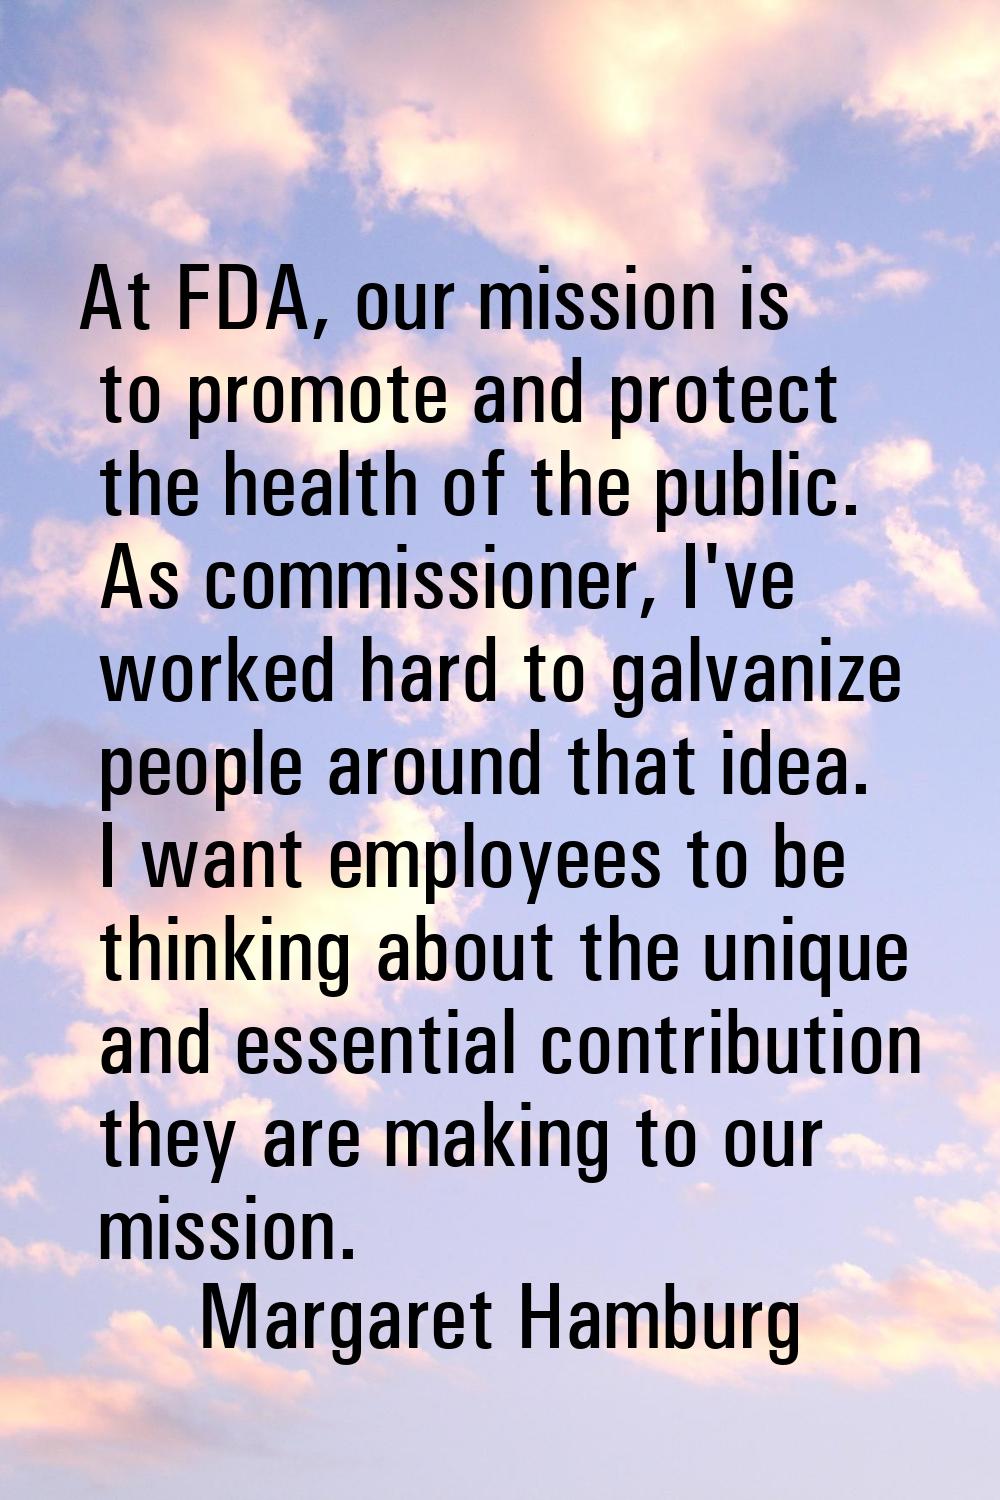 At FDA, our mission is to promote and protect the health of the public. As commissioner, I've worke